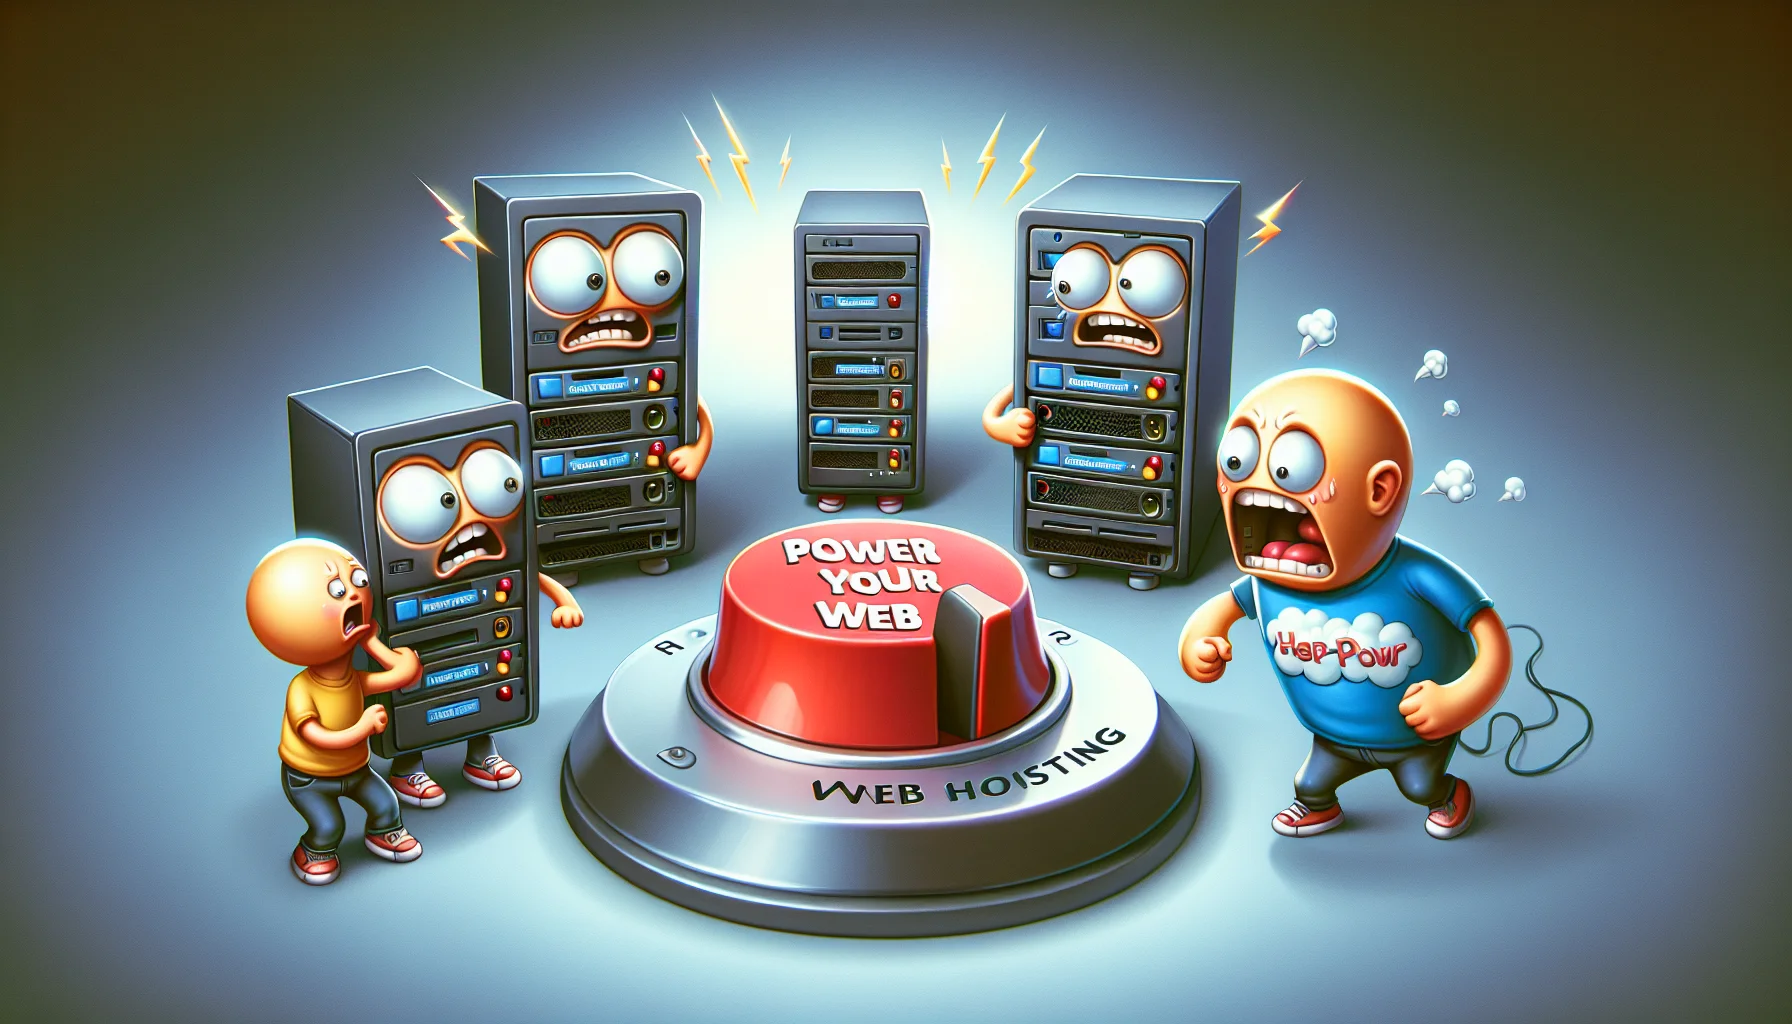 Create a humorous and realistic image showcasing web hosting in action. There should be three anthropomorphic computers, each with a different comical expression on their faces. In the center, a giant switch button with the words 'power your web' inscribed on it is present. One computer is nervously pushing the button, another seems excited and the third one appears slightly confused. These computers symbolically represent various aspects of web hosting. Strive to generate a scene that compels curiosity and laughter.